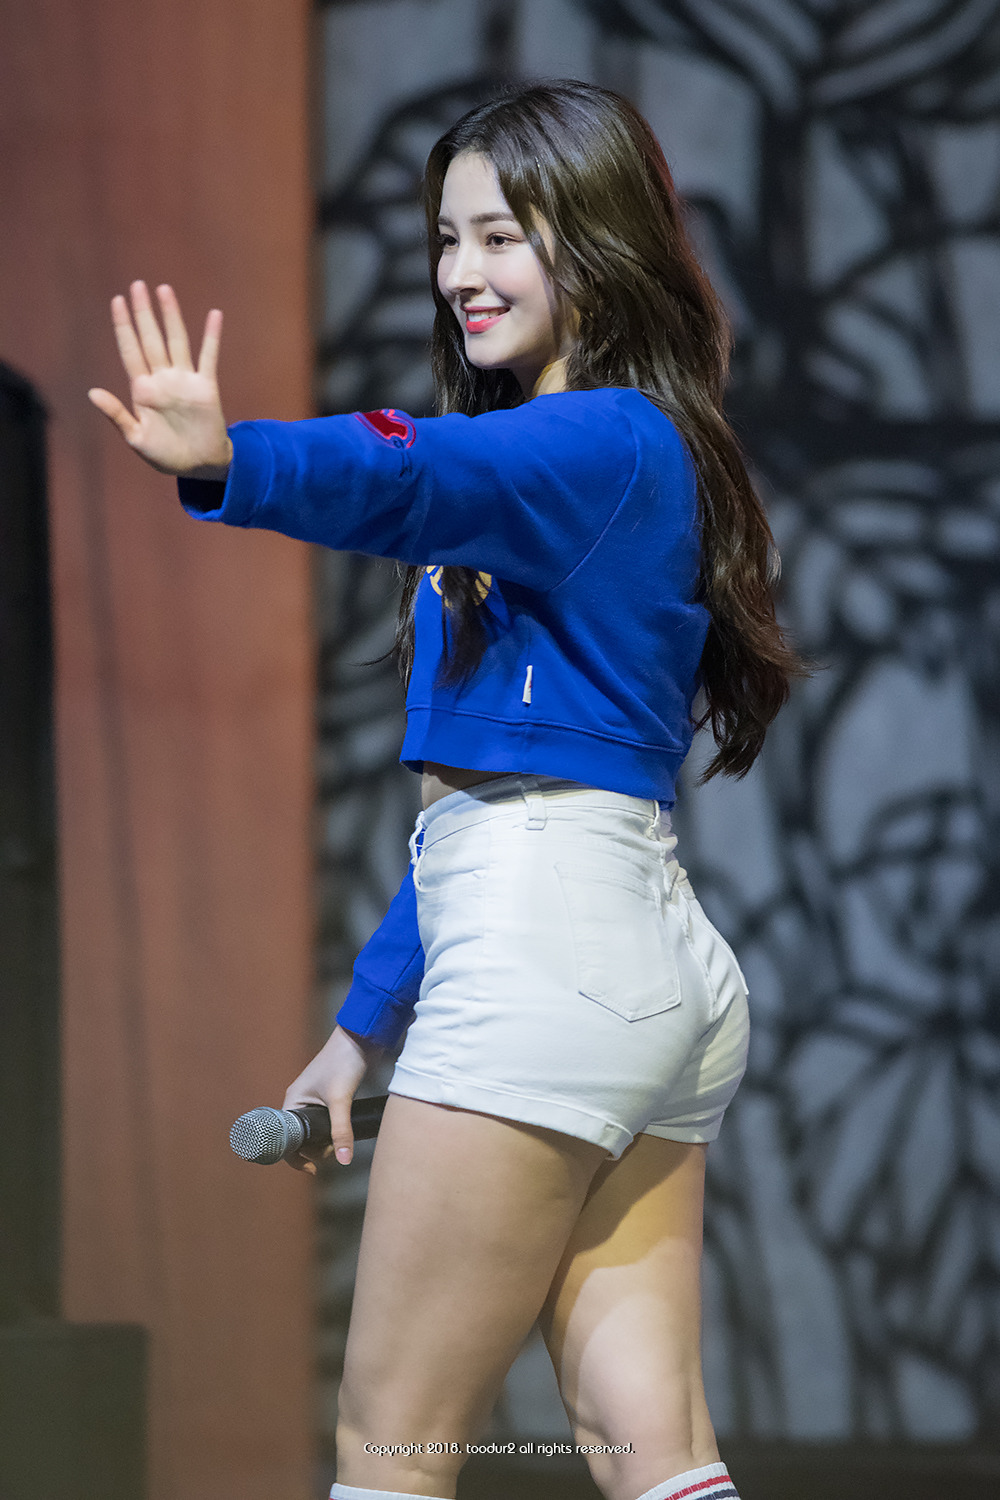 THE MOST SEXIEST OUTFIT OF NANCY MOMOLAND - Sexy K-pop